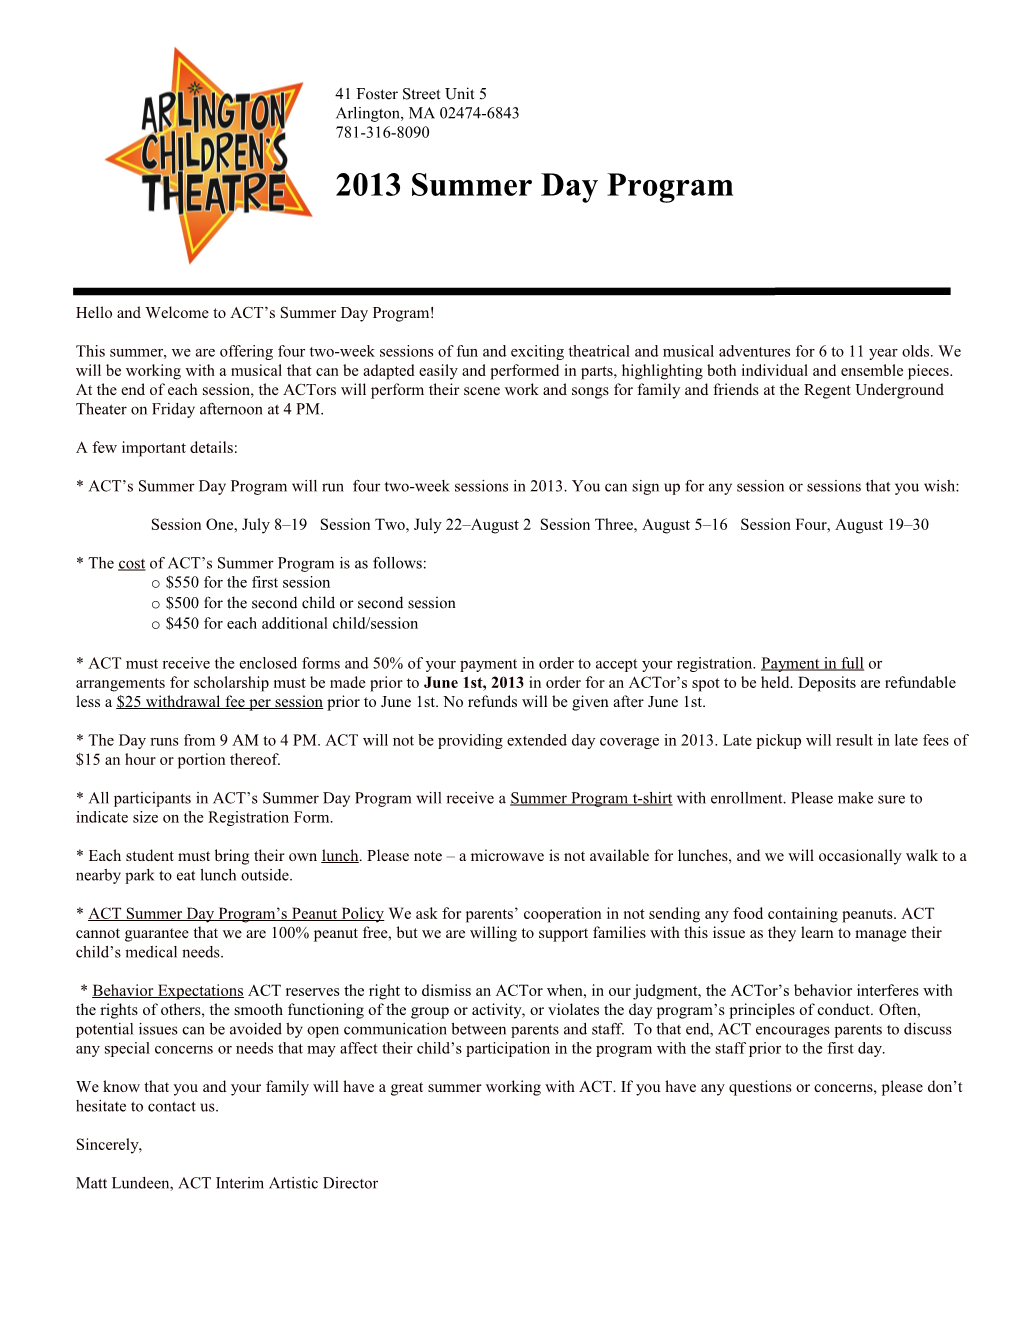 Hello and Welcome to ACT S Summer Day Program!